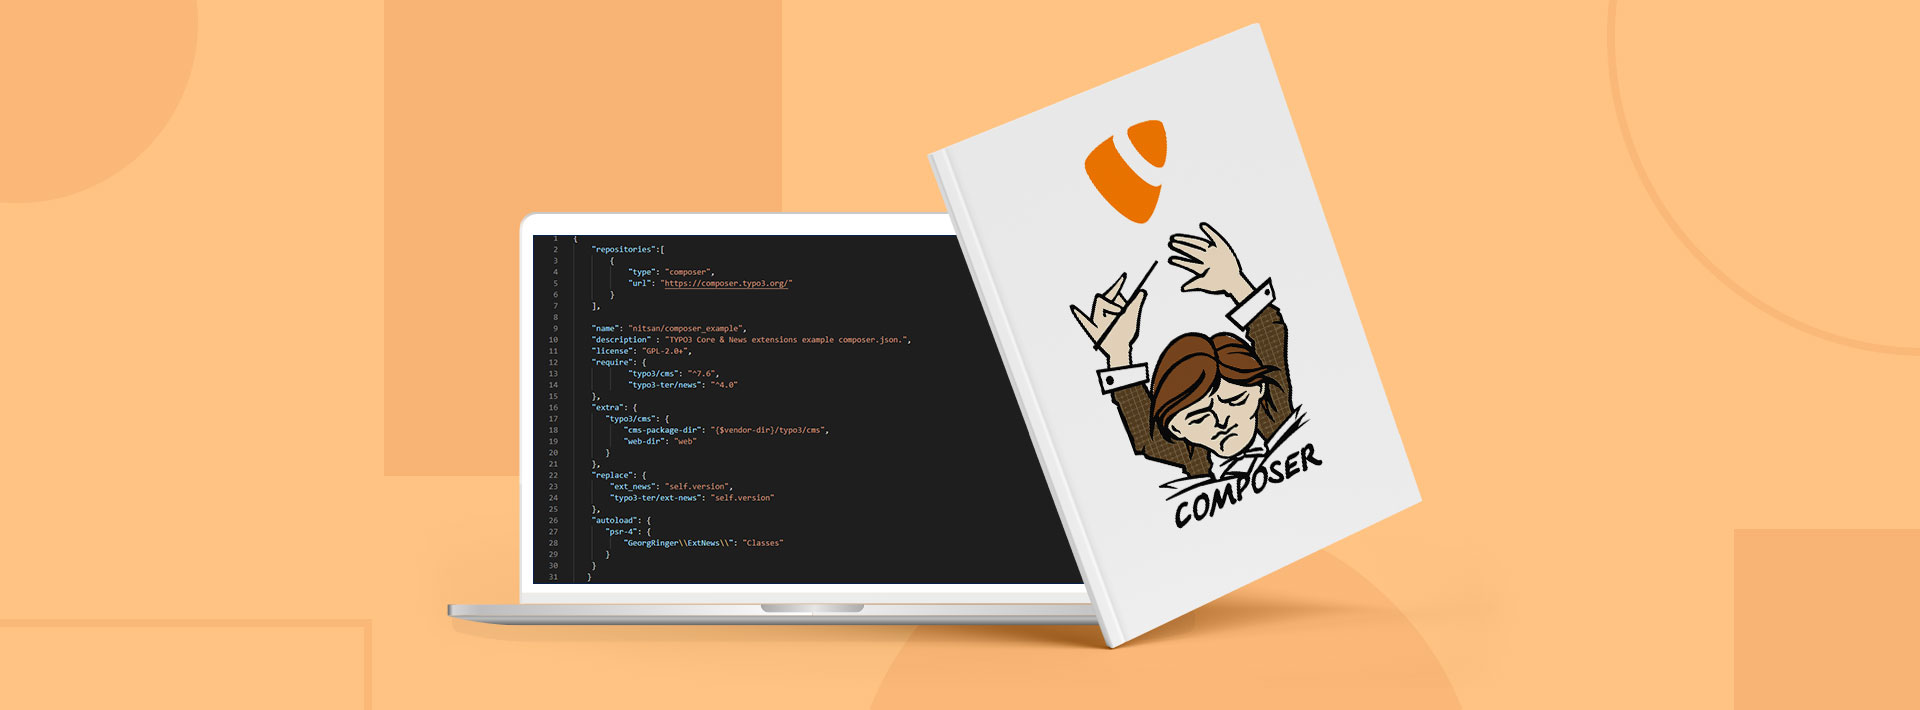 [iTUG: Week-27] Step by step guide to TYPO3 Composer